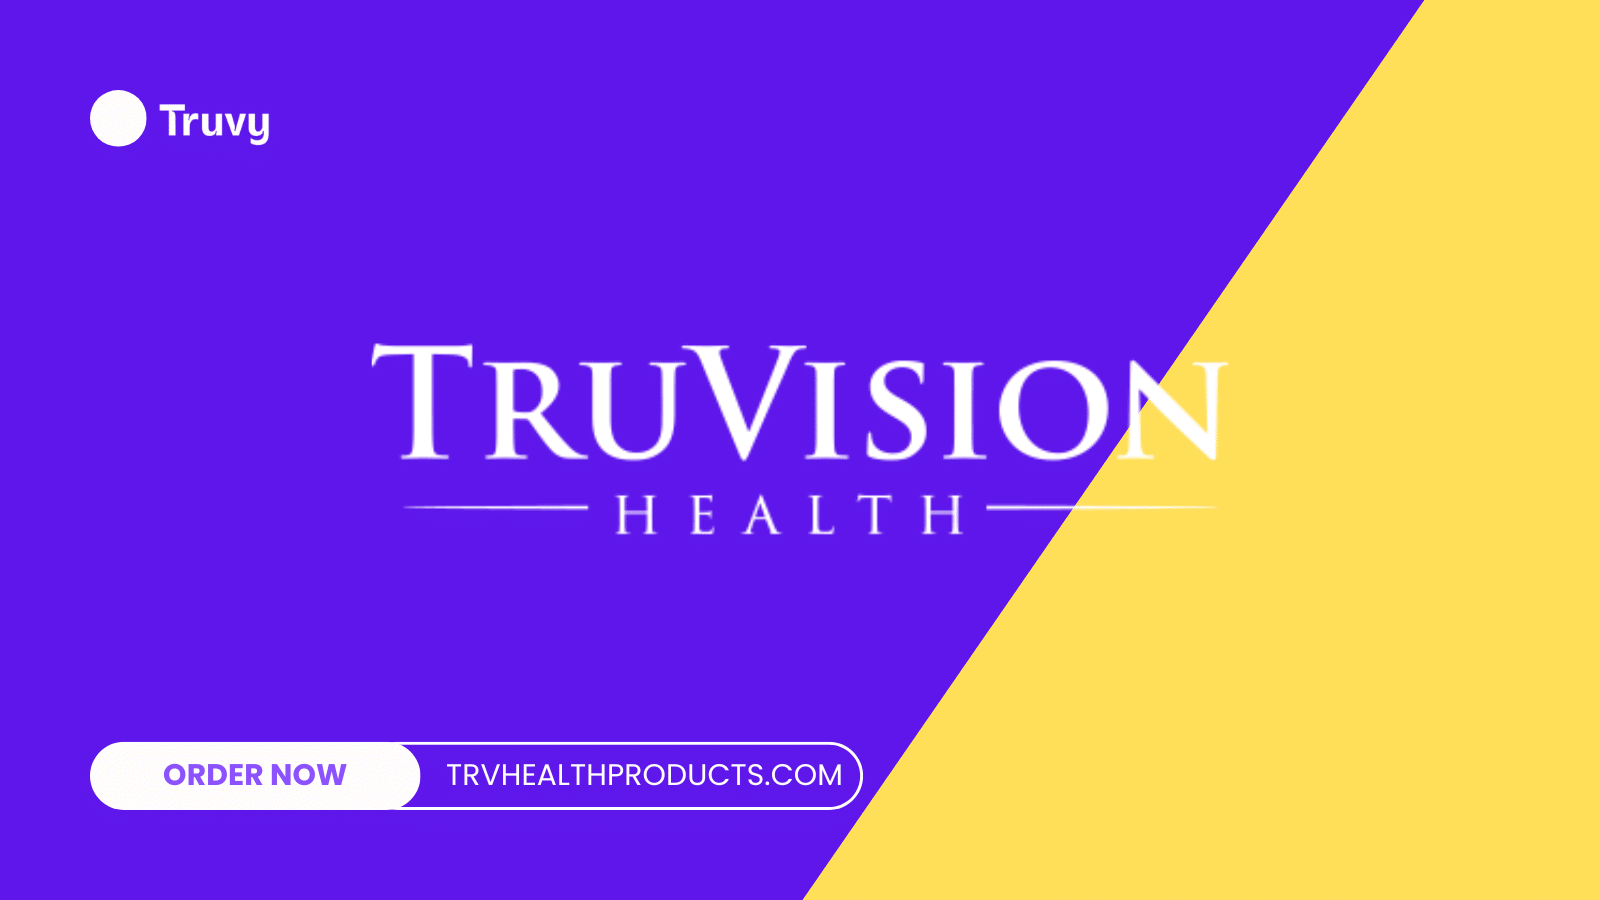 TruVision Health to Truvy: A Transformation Rooted in Success